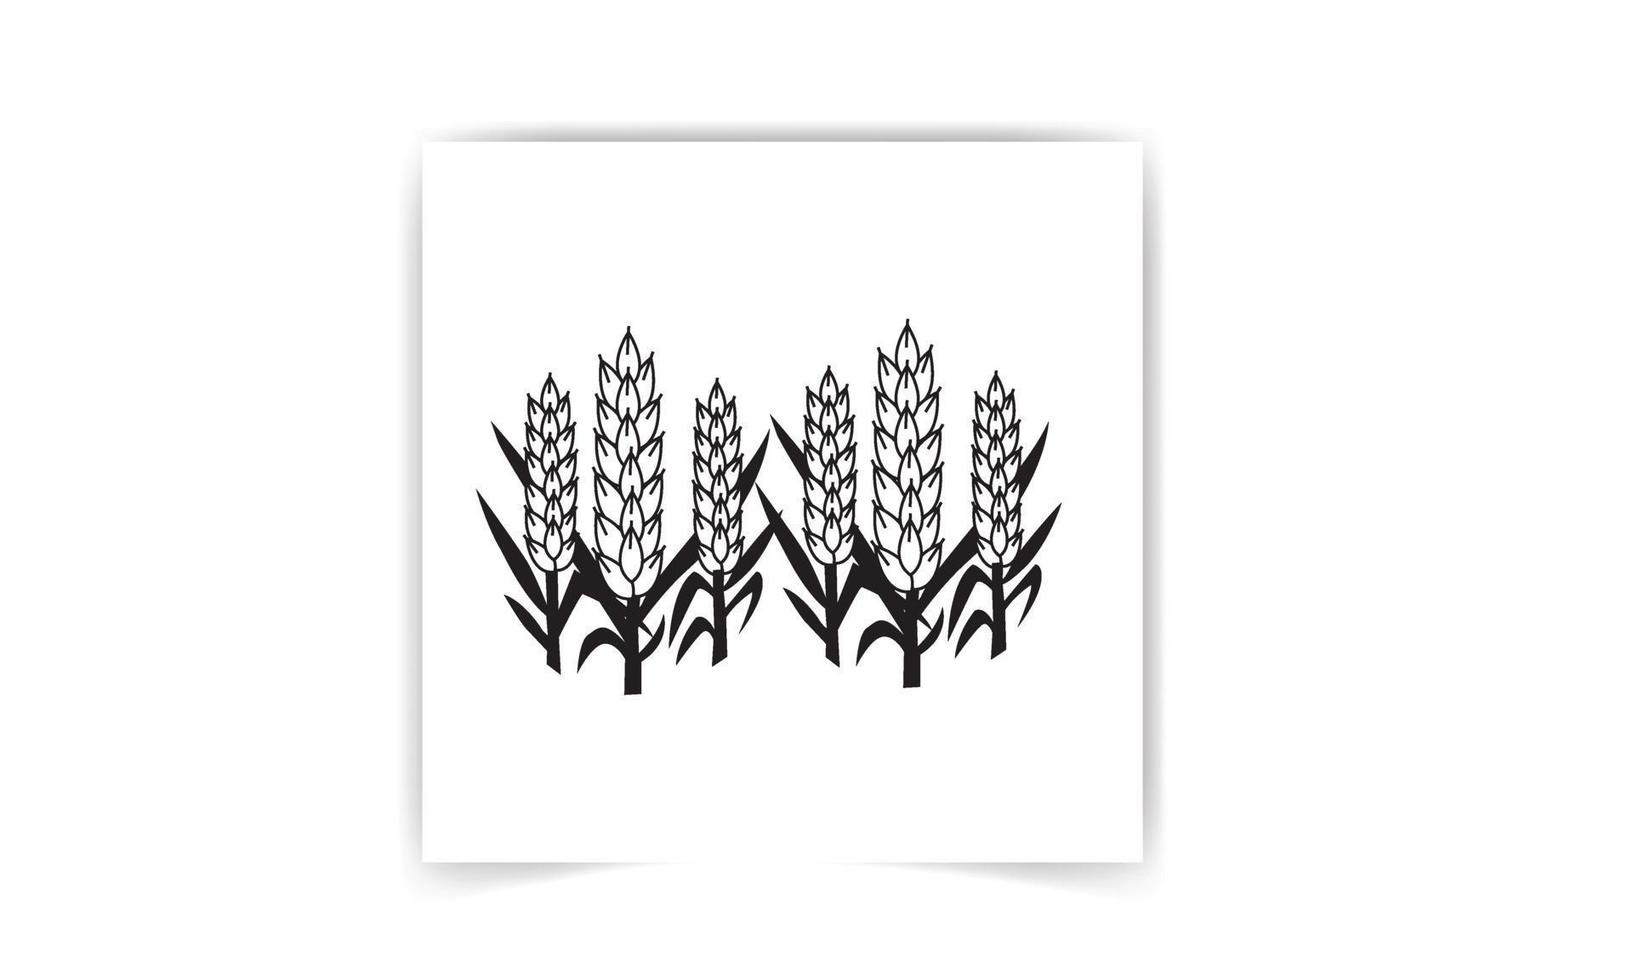 Rice Oryza sativa, Asian rice. Set of vector illustrations of rice panicles isolated on black and white background